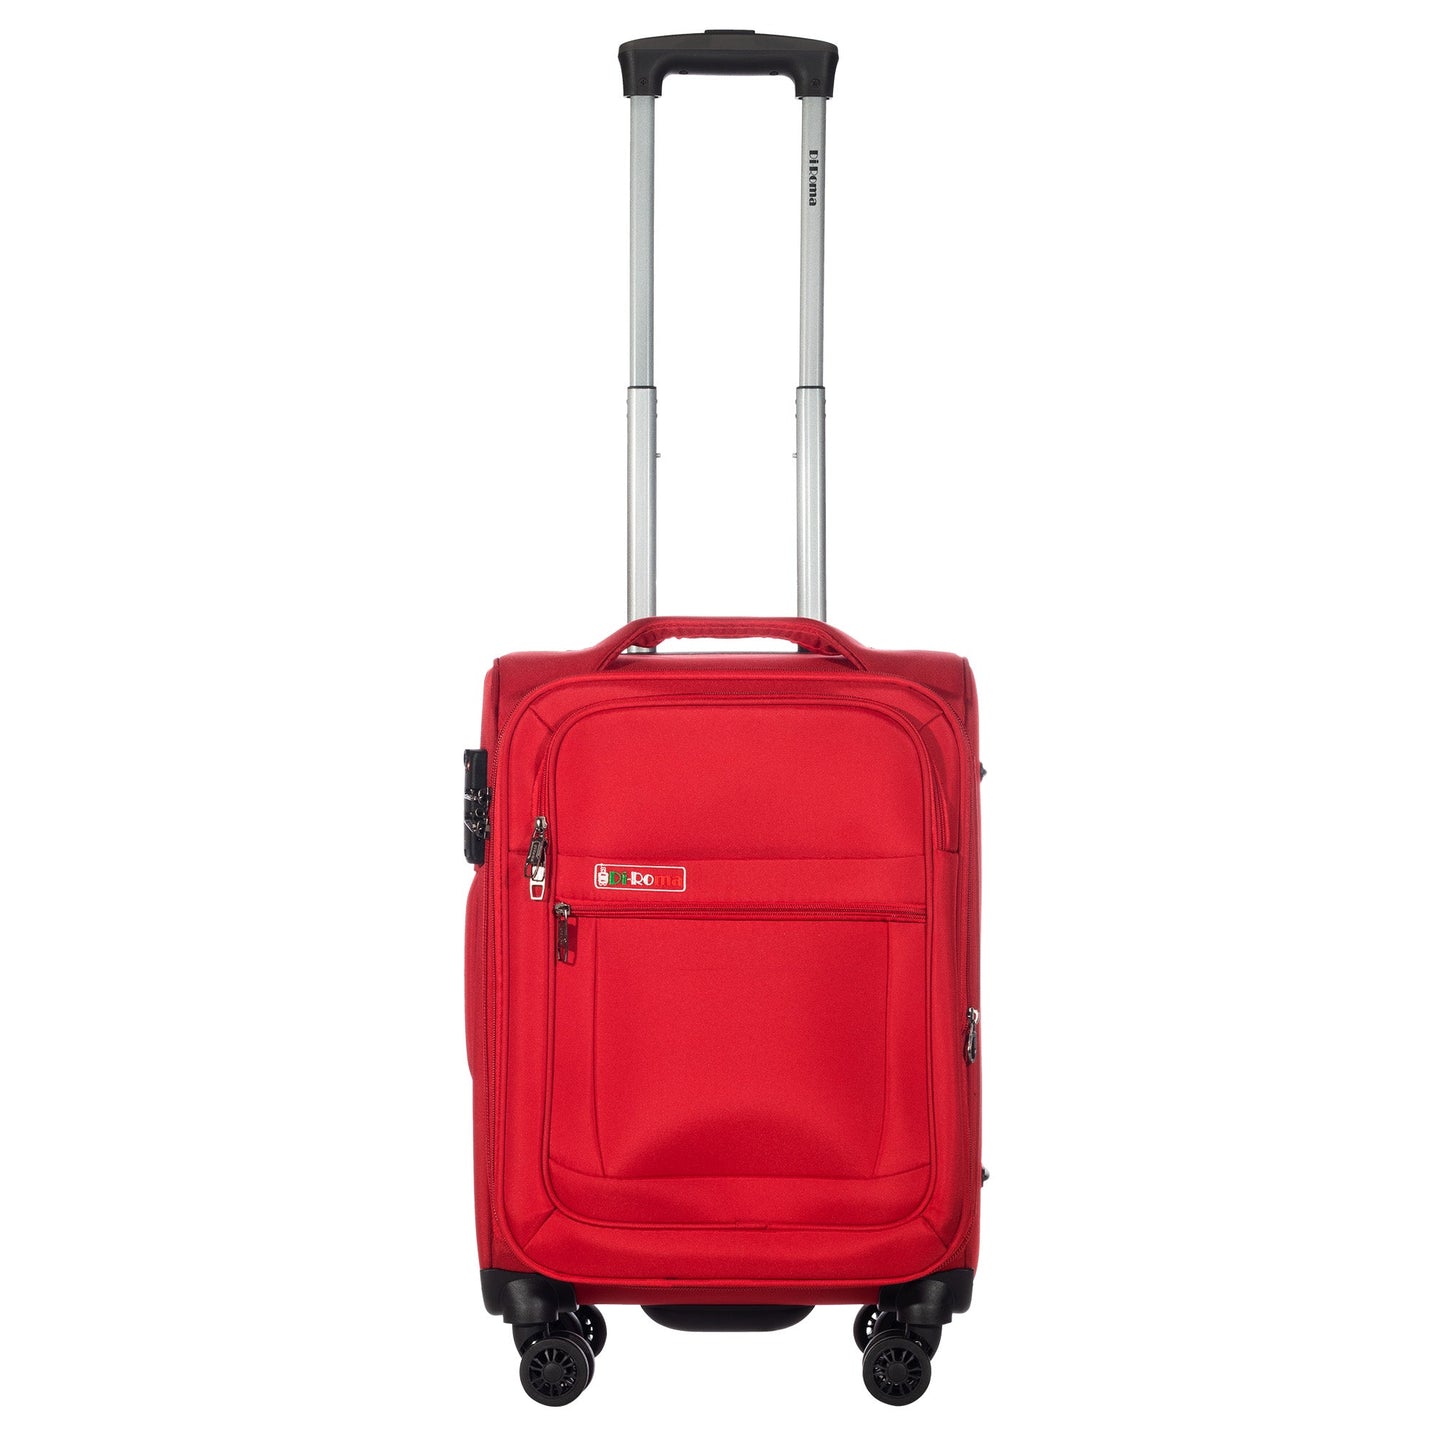 Luca Collection Red luggage Set 3pc(20/26/30") Suitcase